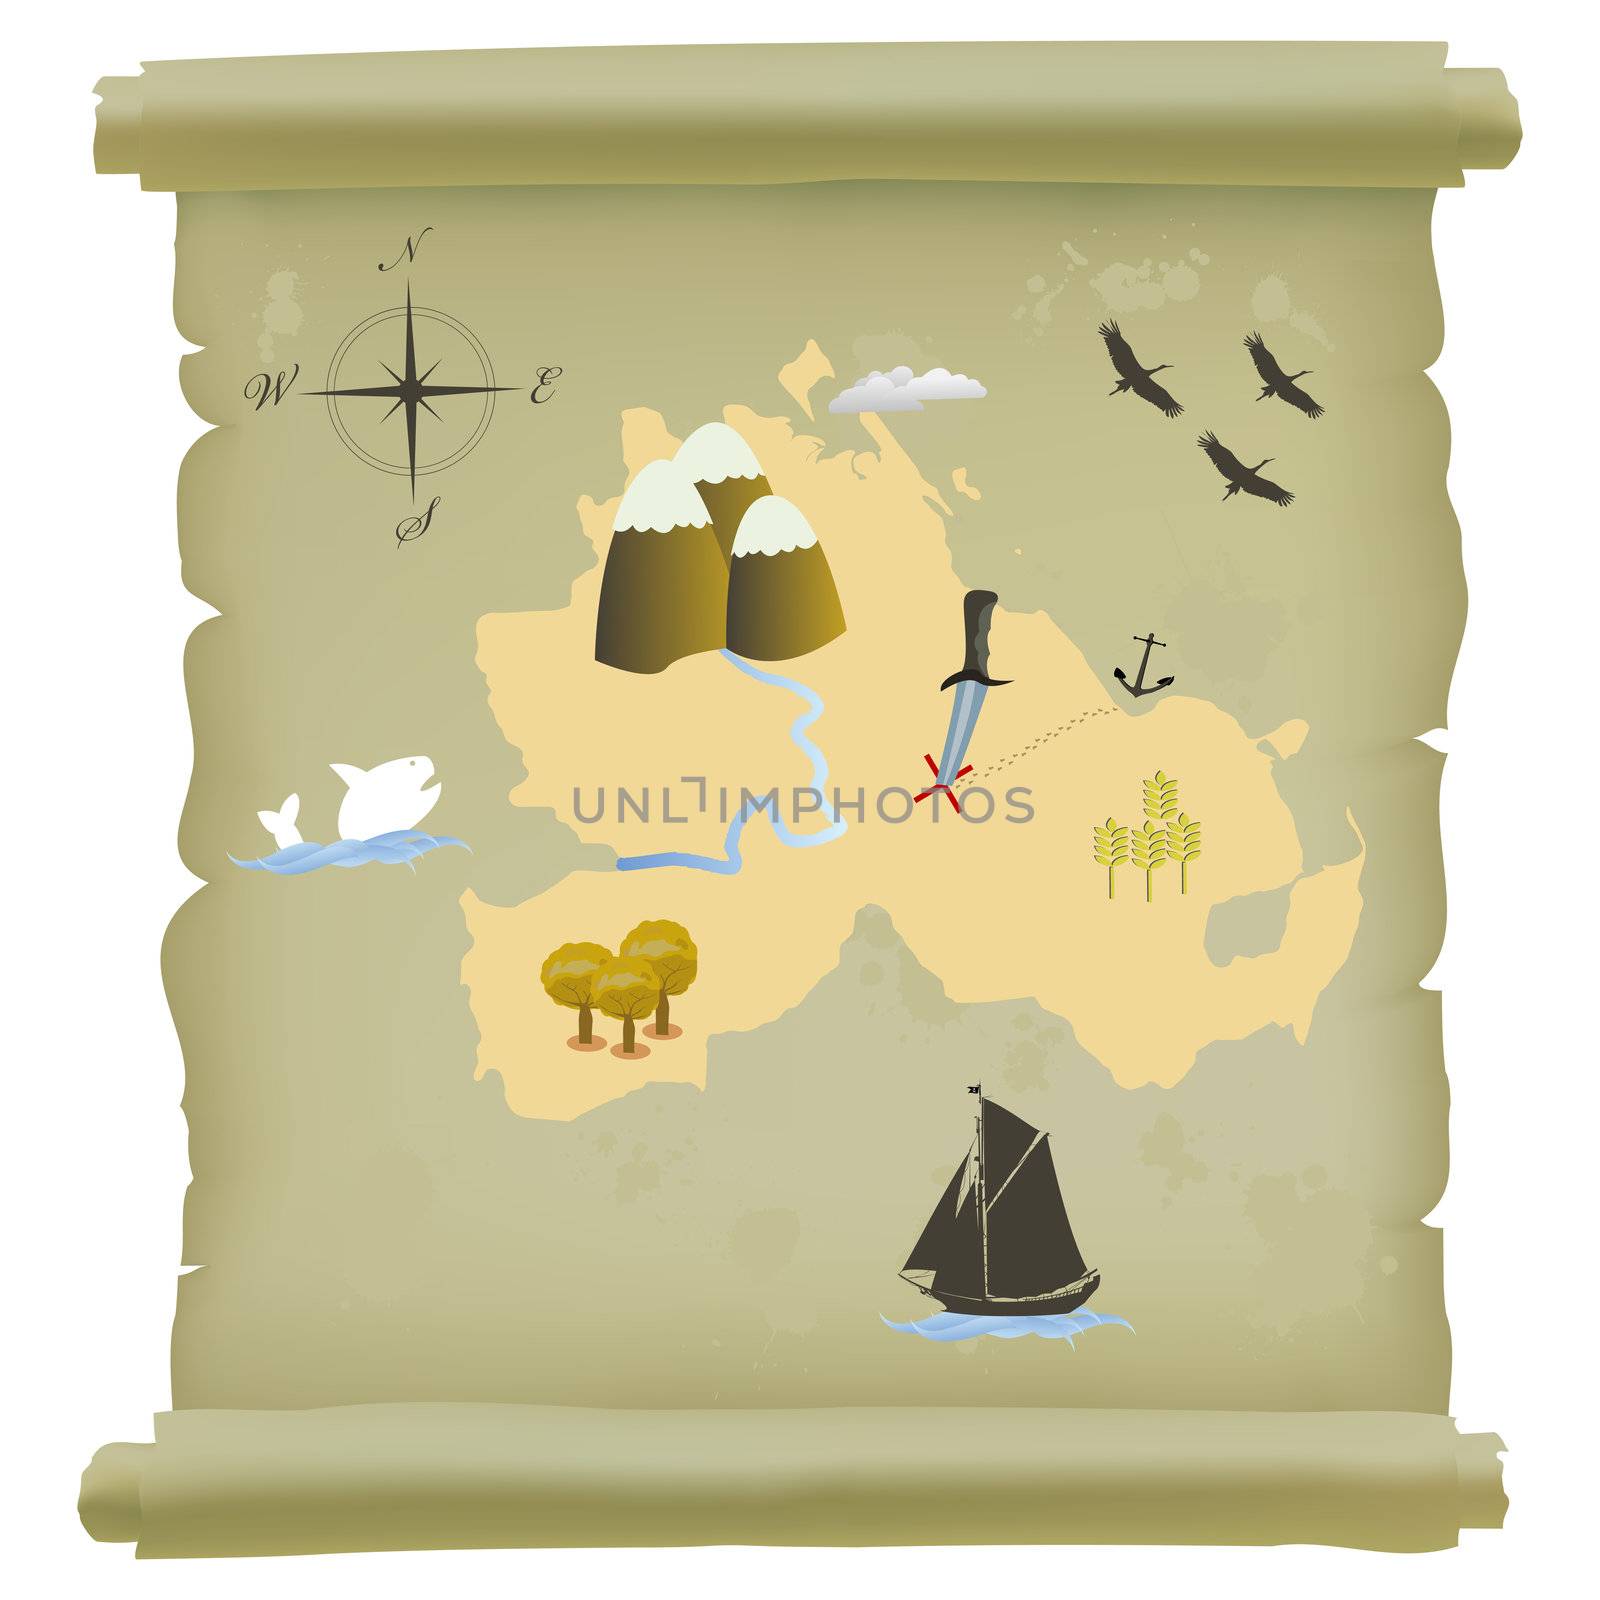 Papirus roll with treasure island map. Isolate object over white background